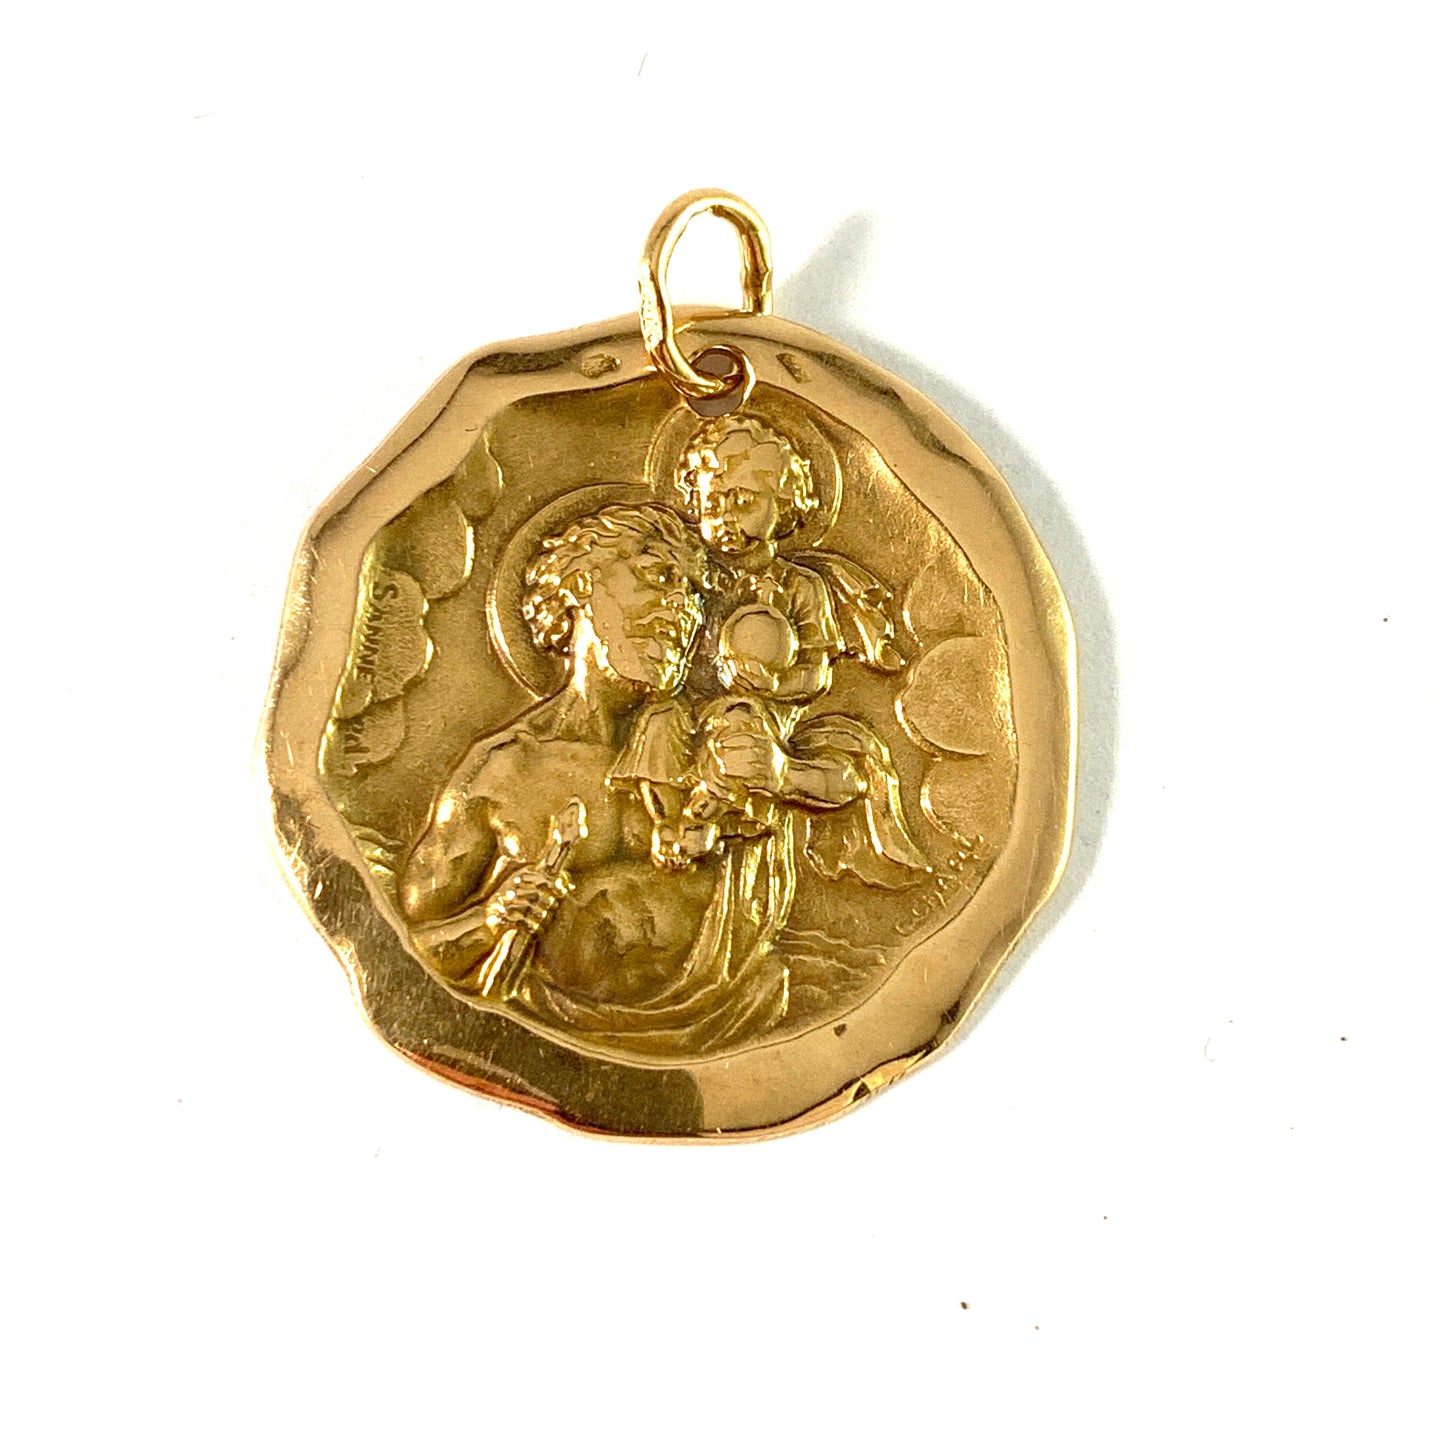 France early 1900s. Solid 18k Gold Medal Pendant. Fully Hallmarked and Signed. 6.1gram